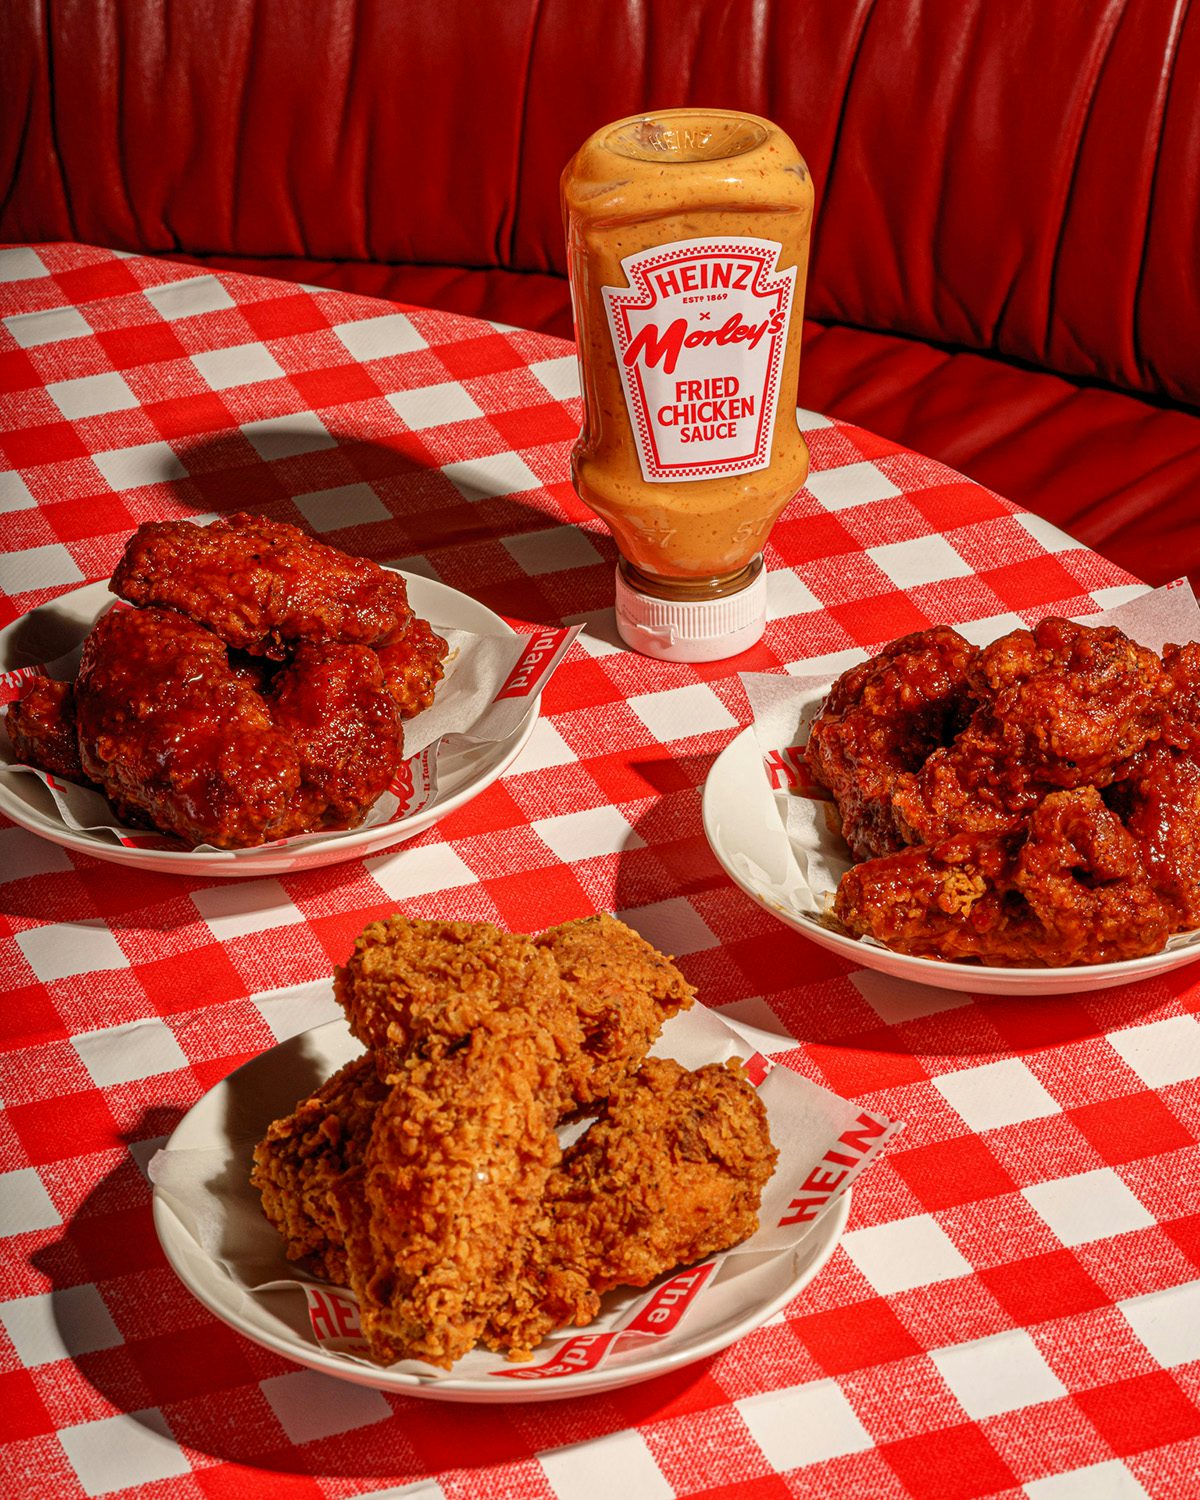 Photograph of three plates of fried chicken and a squeezy bottle of Heinz and Morley's Fried Chicken Sauce laid on a red gingham tablecloth